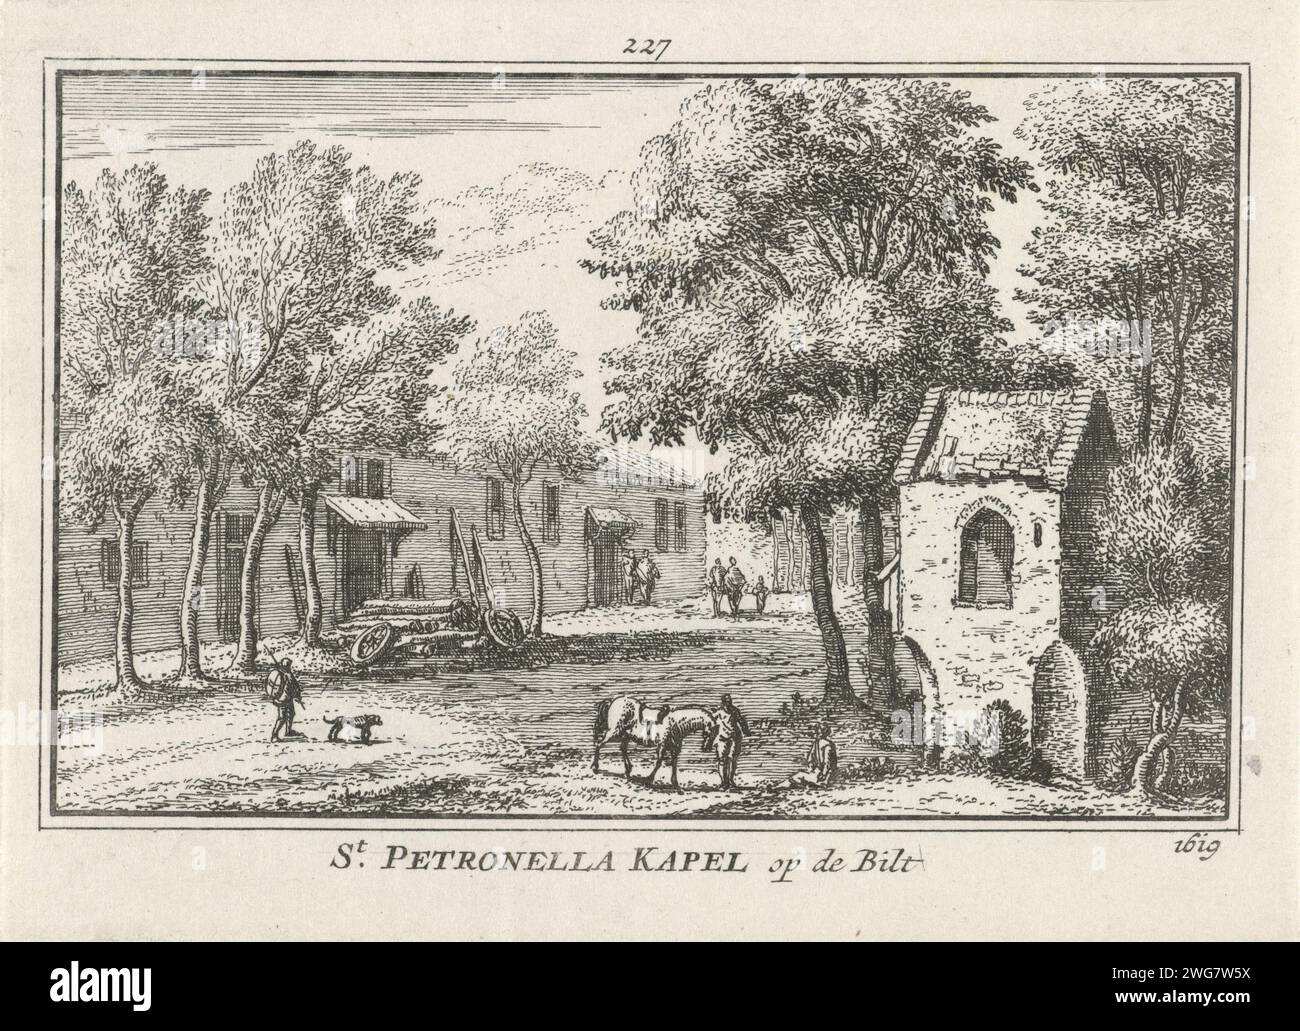 View of the Sint Petronella's Chapel in De Bilt, 1619, Abraham Rademaker, 1727 - 1733 print View of the Sint Petronella's chapel in the village of De Bilt, in the situation around 1619. To the left of the chapel a number of hikers, a horse and a dog. Amsterdam paper etching / engraving church (exterior) - QQ - small church, chapel. dog. 'en route', traveller under way. horse Sint Petronella's chapel Stock Photo